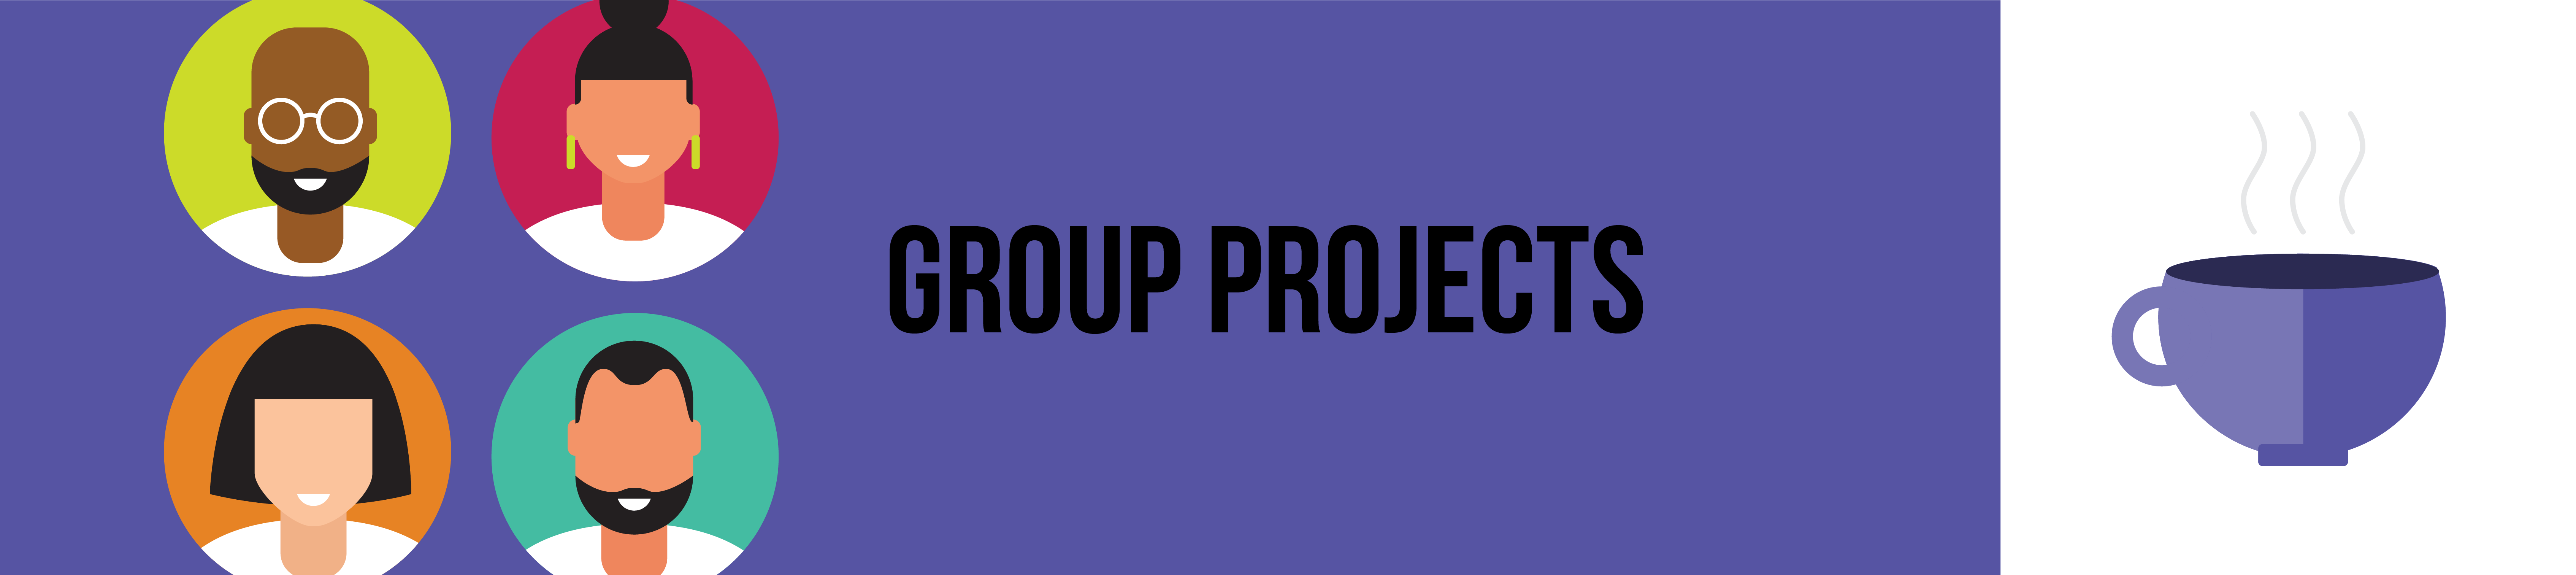 GRAPHIC: four student icons overlaid on purple background. TEXT: Group Projects.